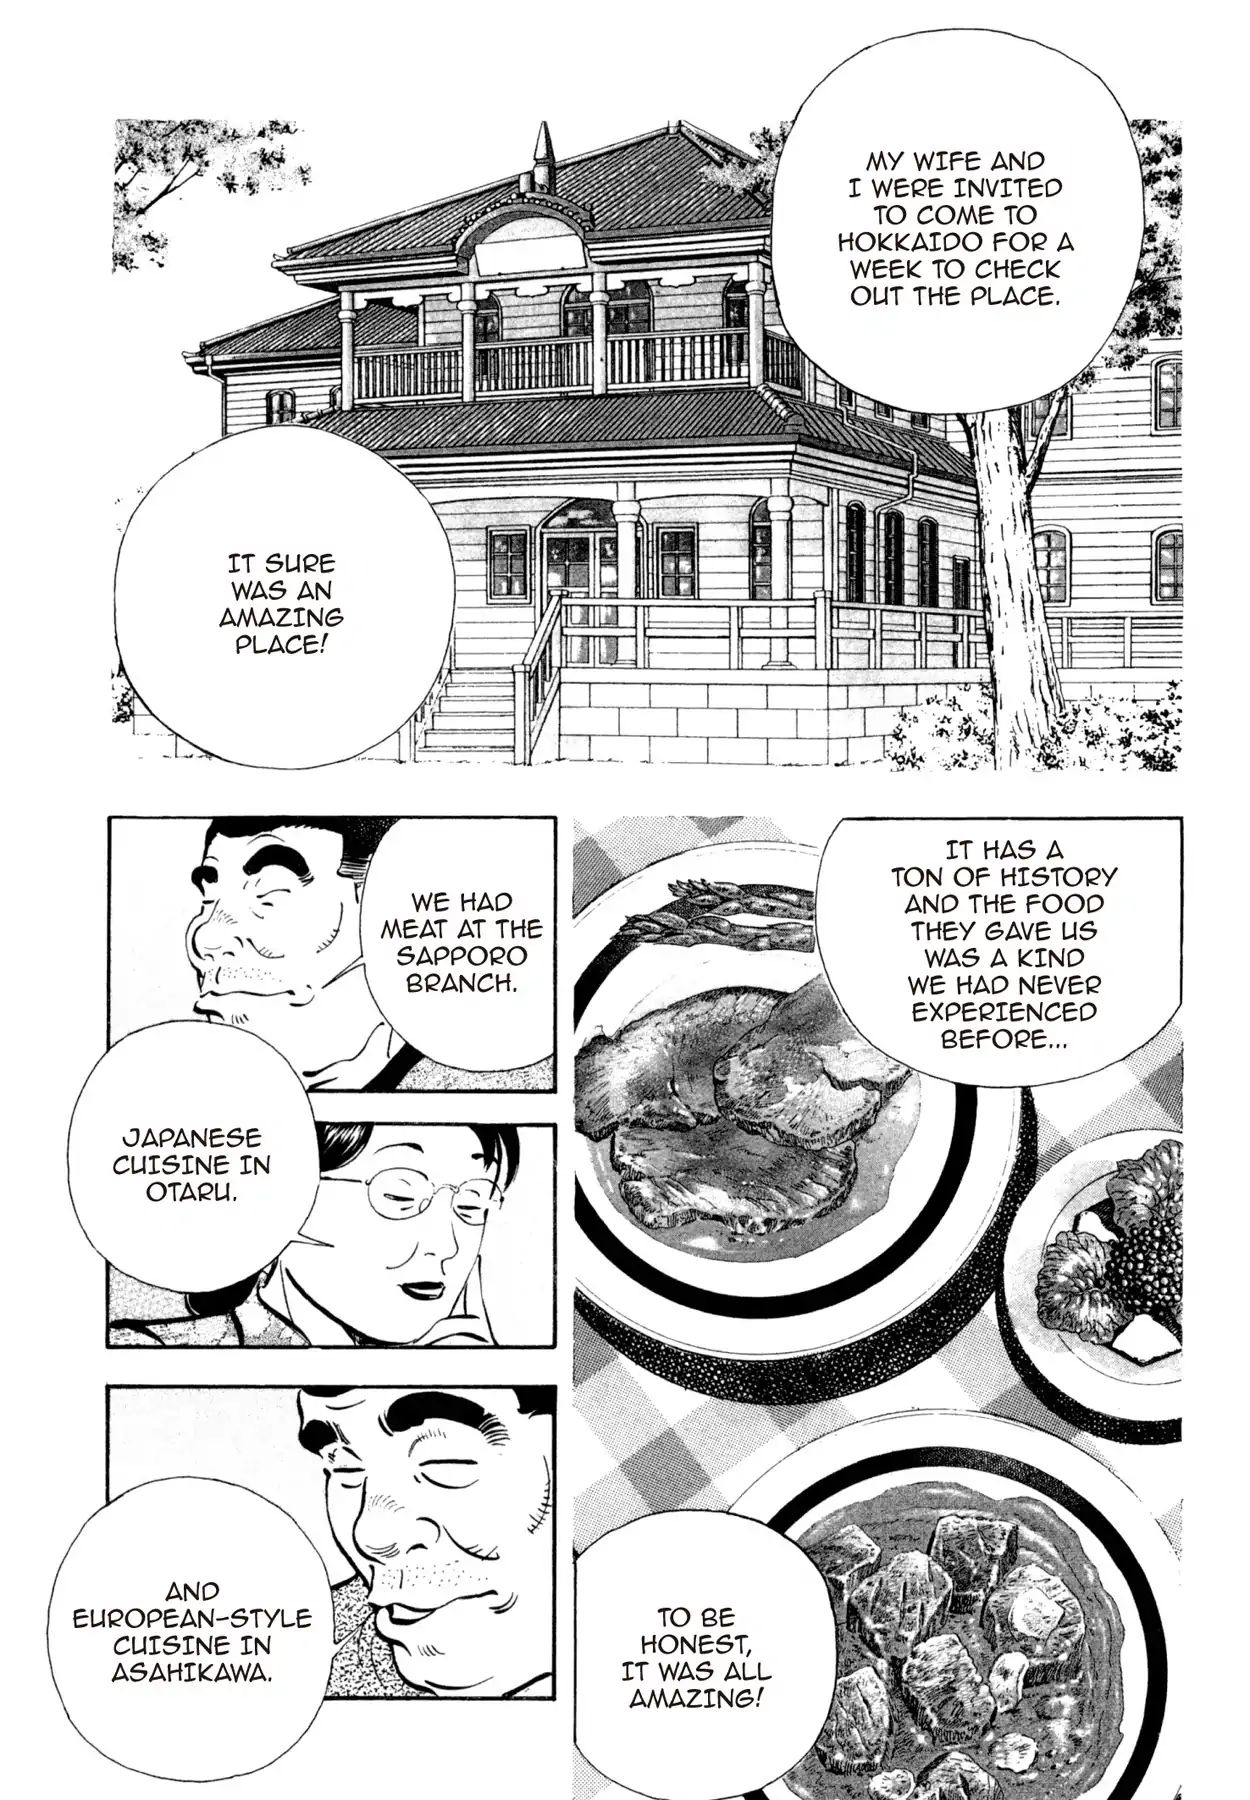 Shoku King VOL.19 CHAPTER 169: THE RESTAURANT REVIVAL CONSULTANT